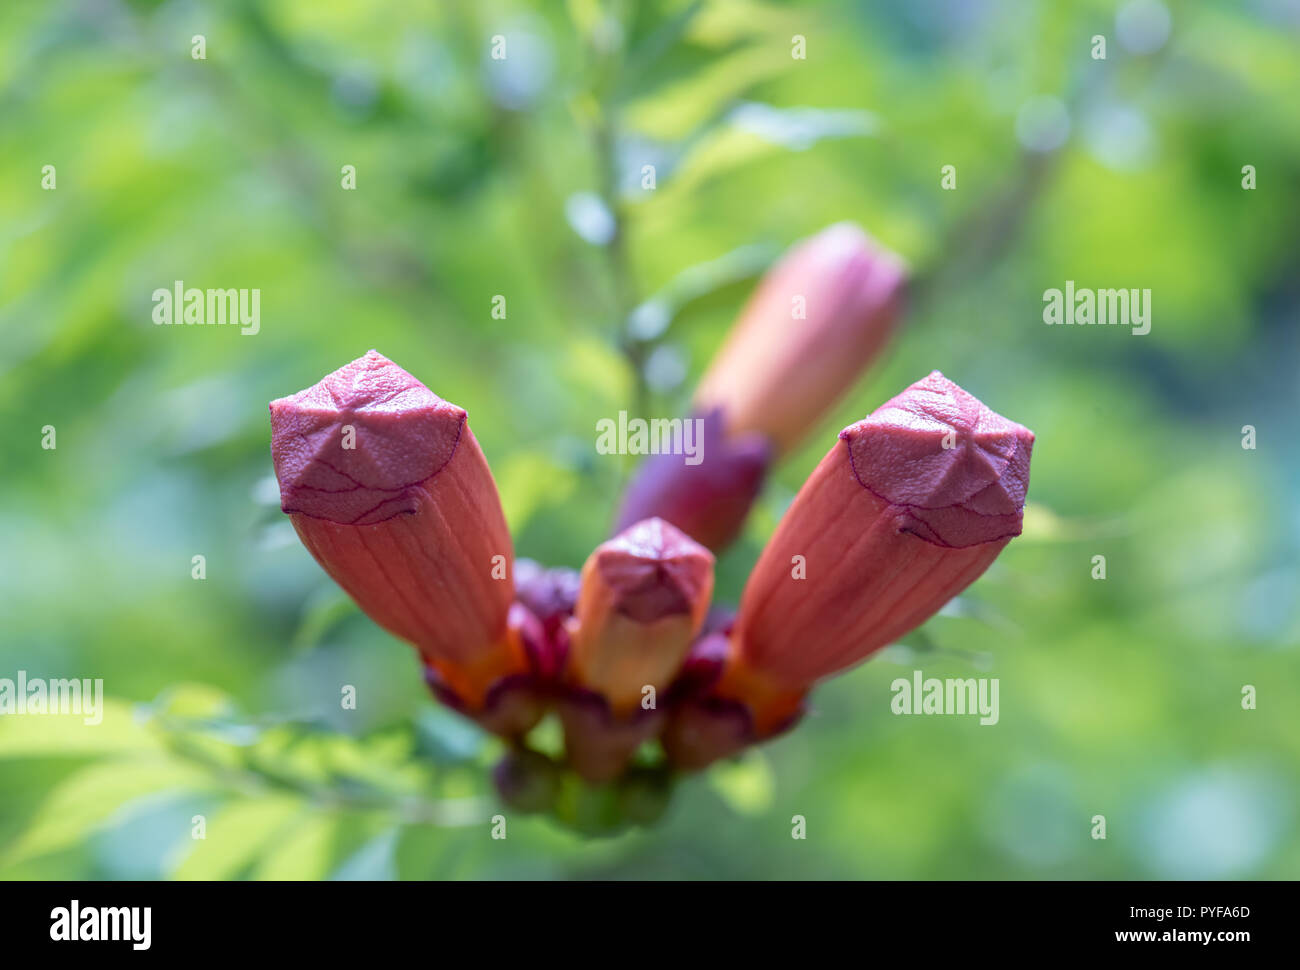 Fine art still life color outdoor floral macro image of a branch of  isolated orange red violet  trumpet creeper blossom buds,natural blurred green Stock Photo